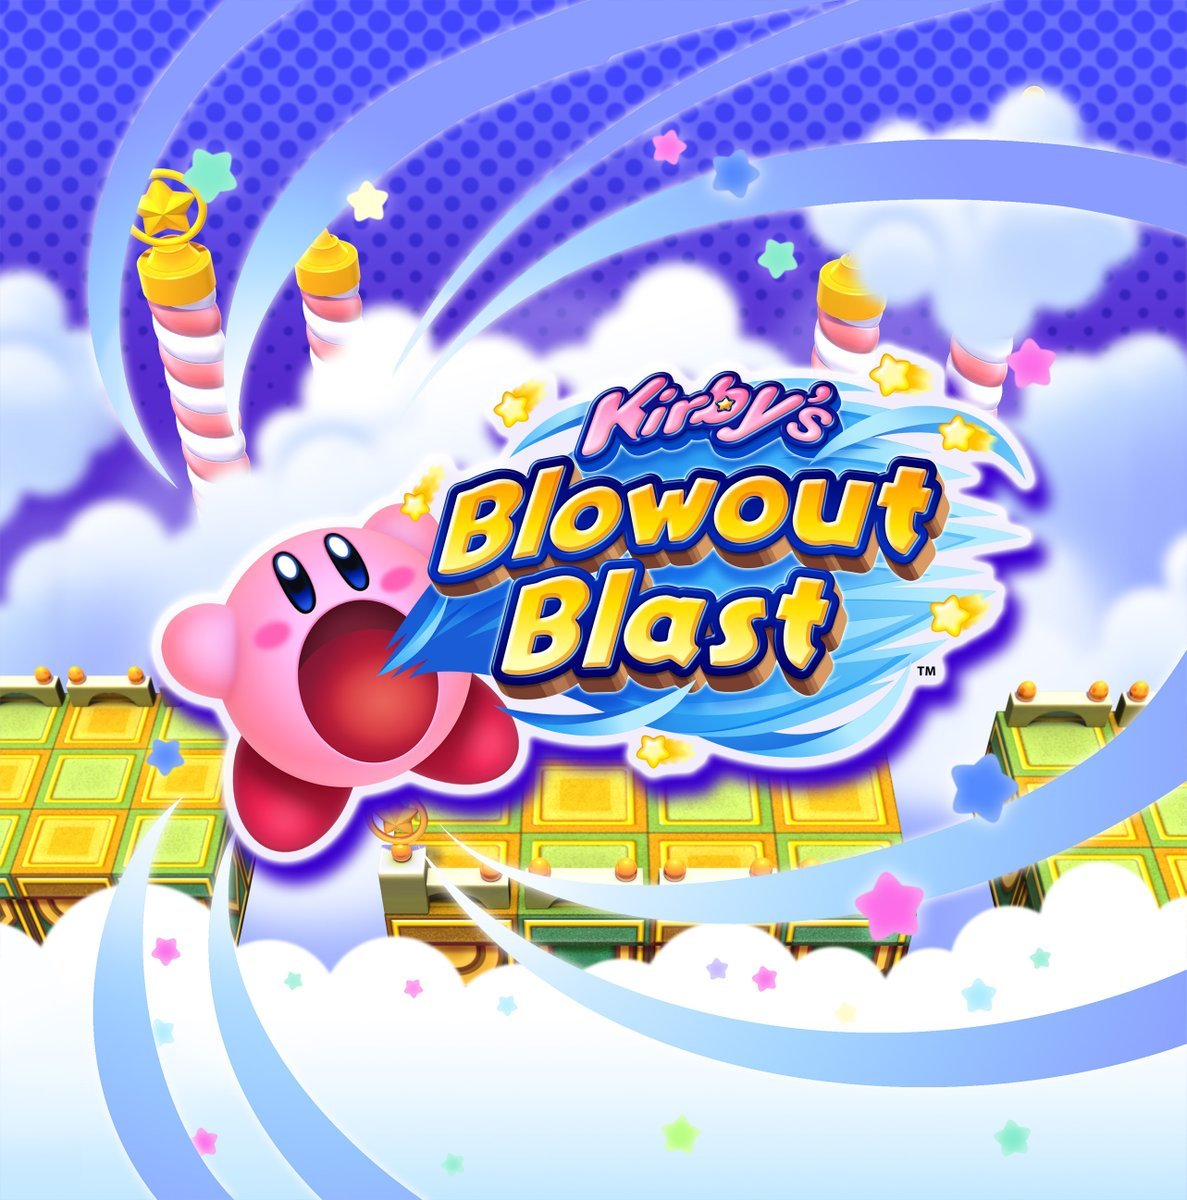 Image of Kirby's Blowout Blast